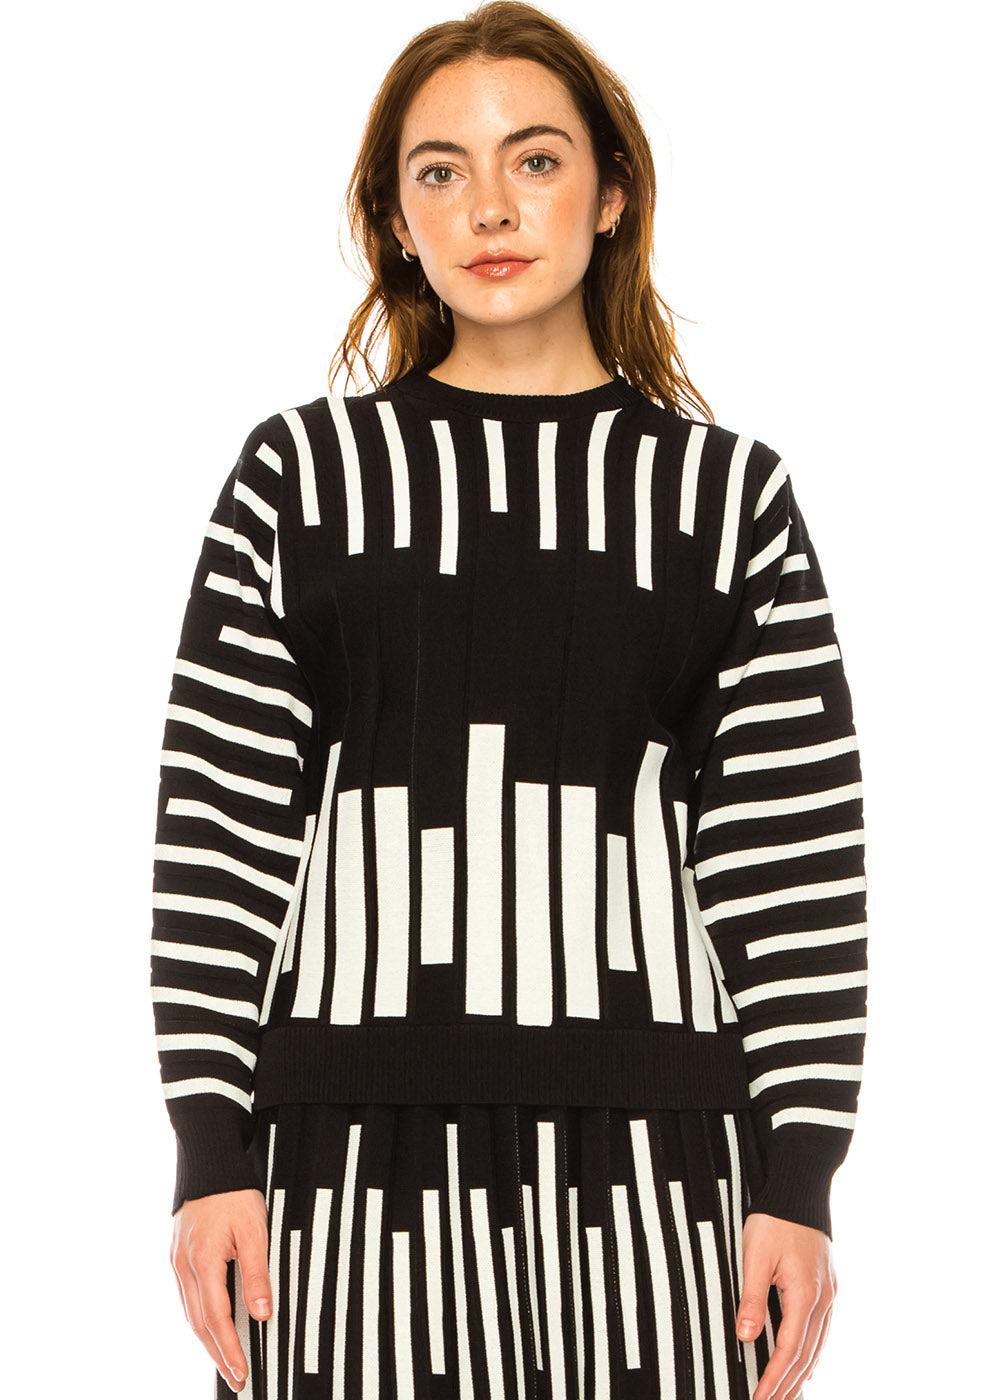 Knit Black and White Stripe Sweater